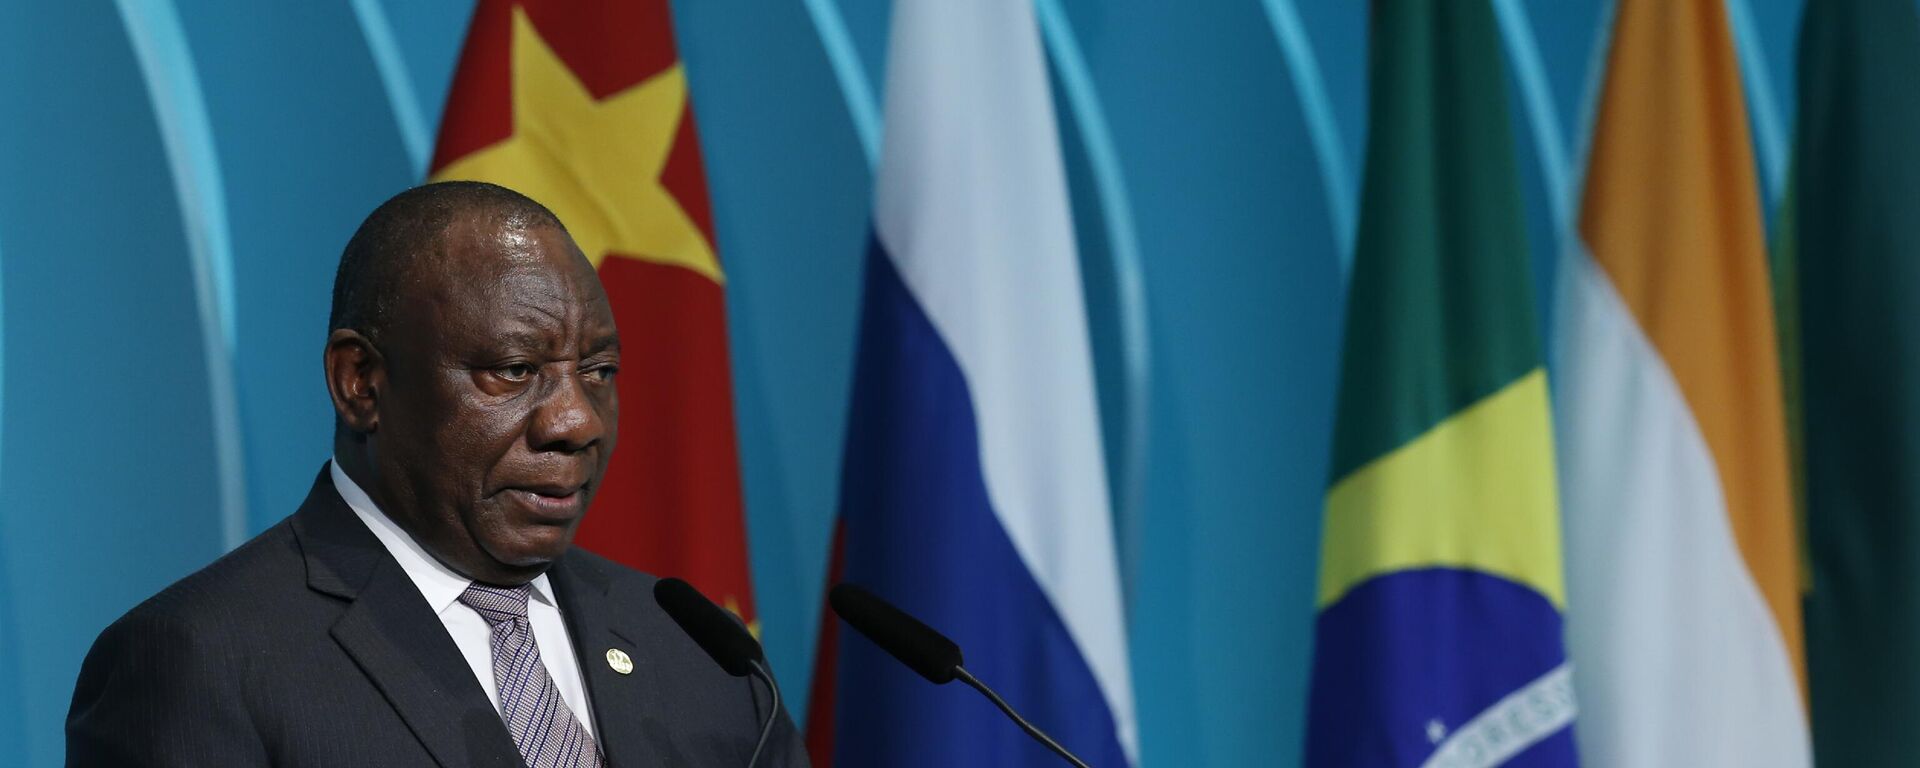 South Africa's President Cyril Ramaphosa speaks during the BRICS Business Council prior the 11th edition of the BRICS Summit, in Brasilia, Brazil, Wednesday, Nov. 13, 2019. - Sputnik International, 1920, 13.12.2022